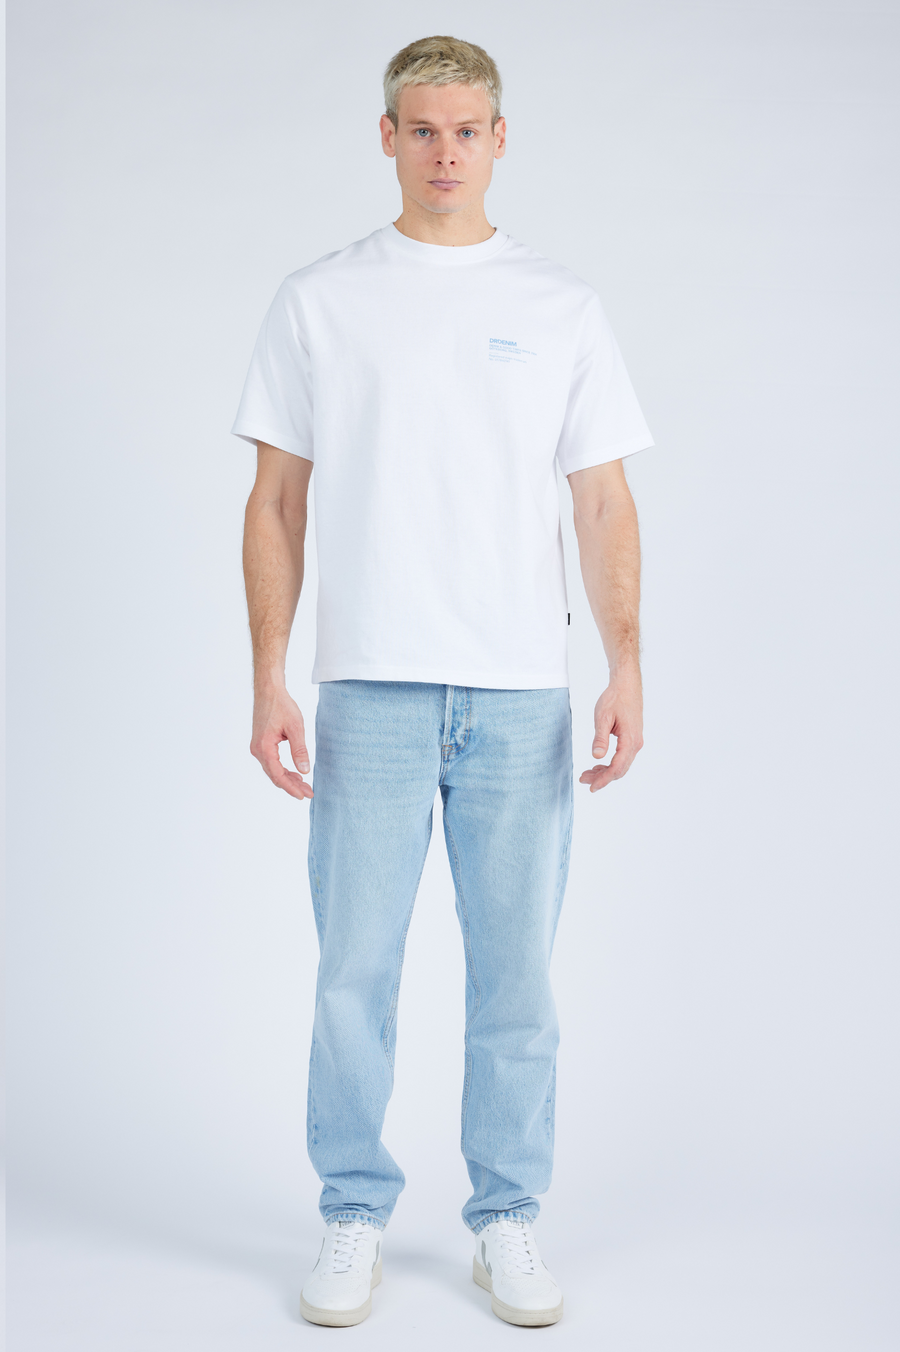 Rush Tapered Jeans - Stream Light Used